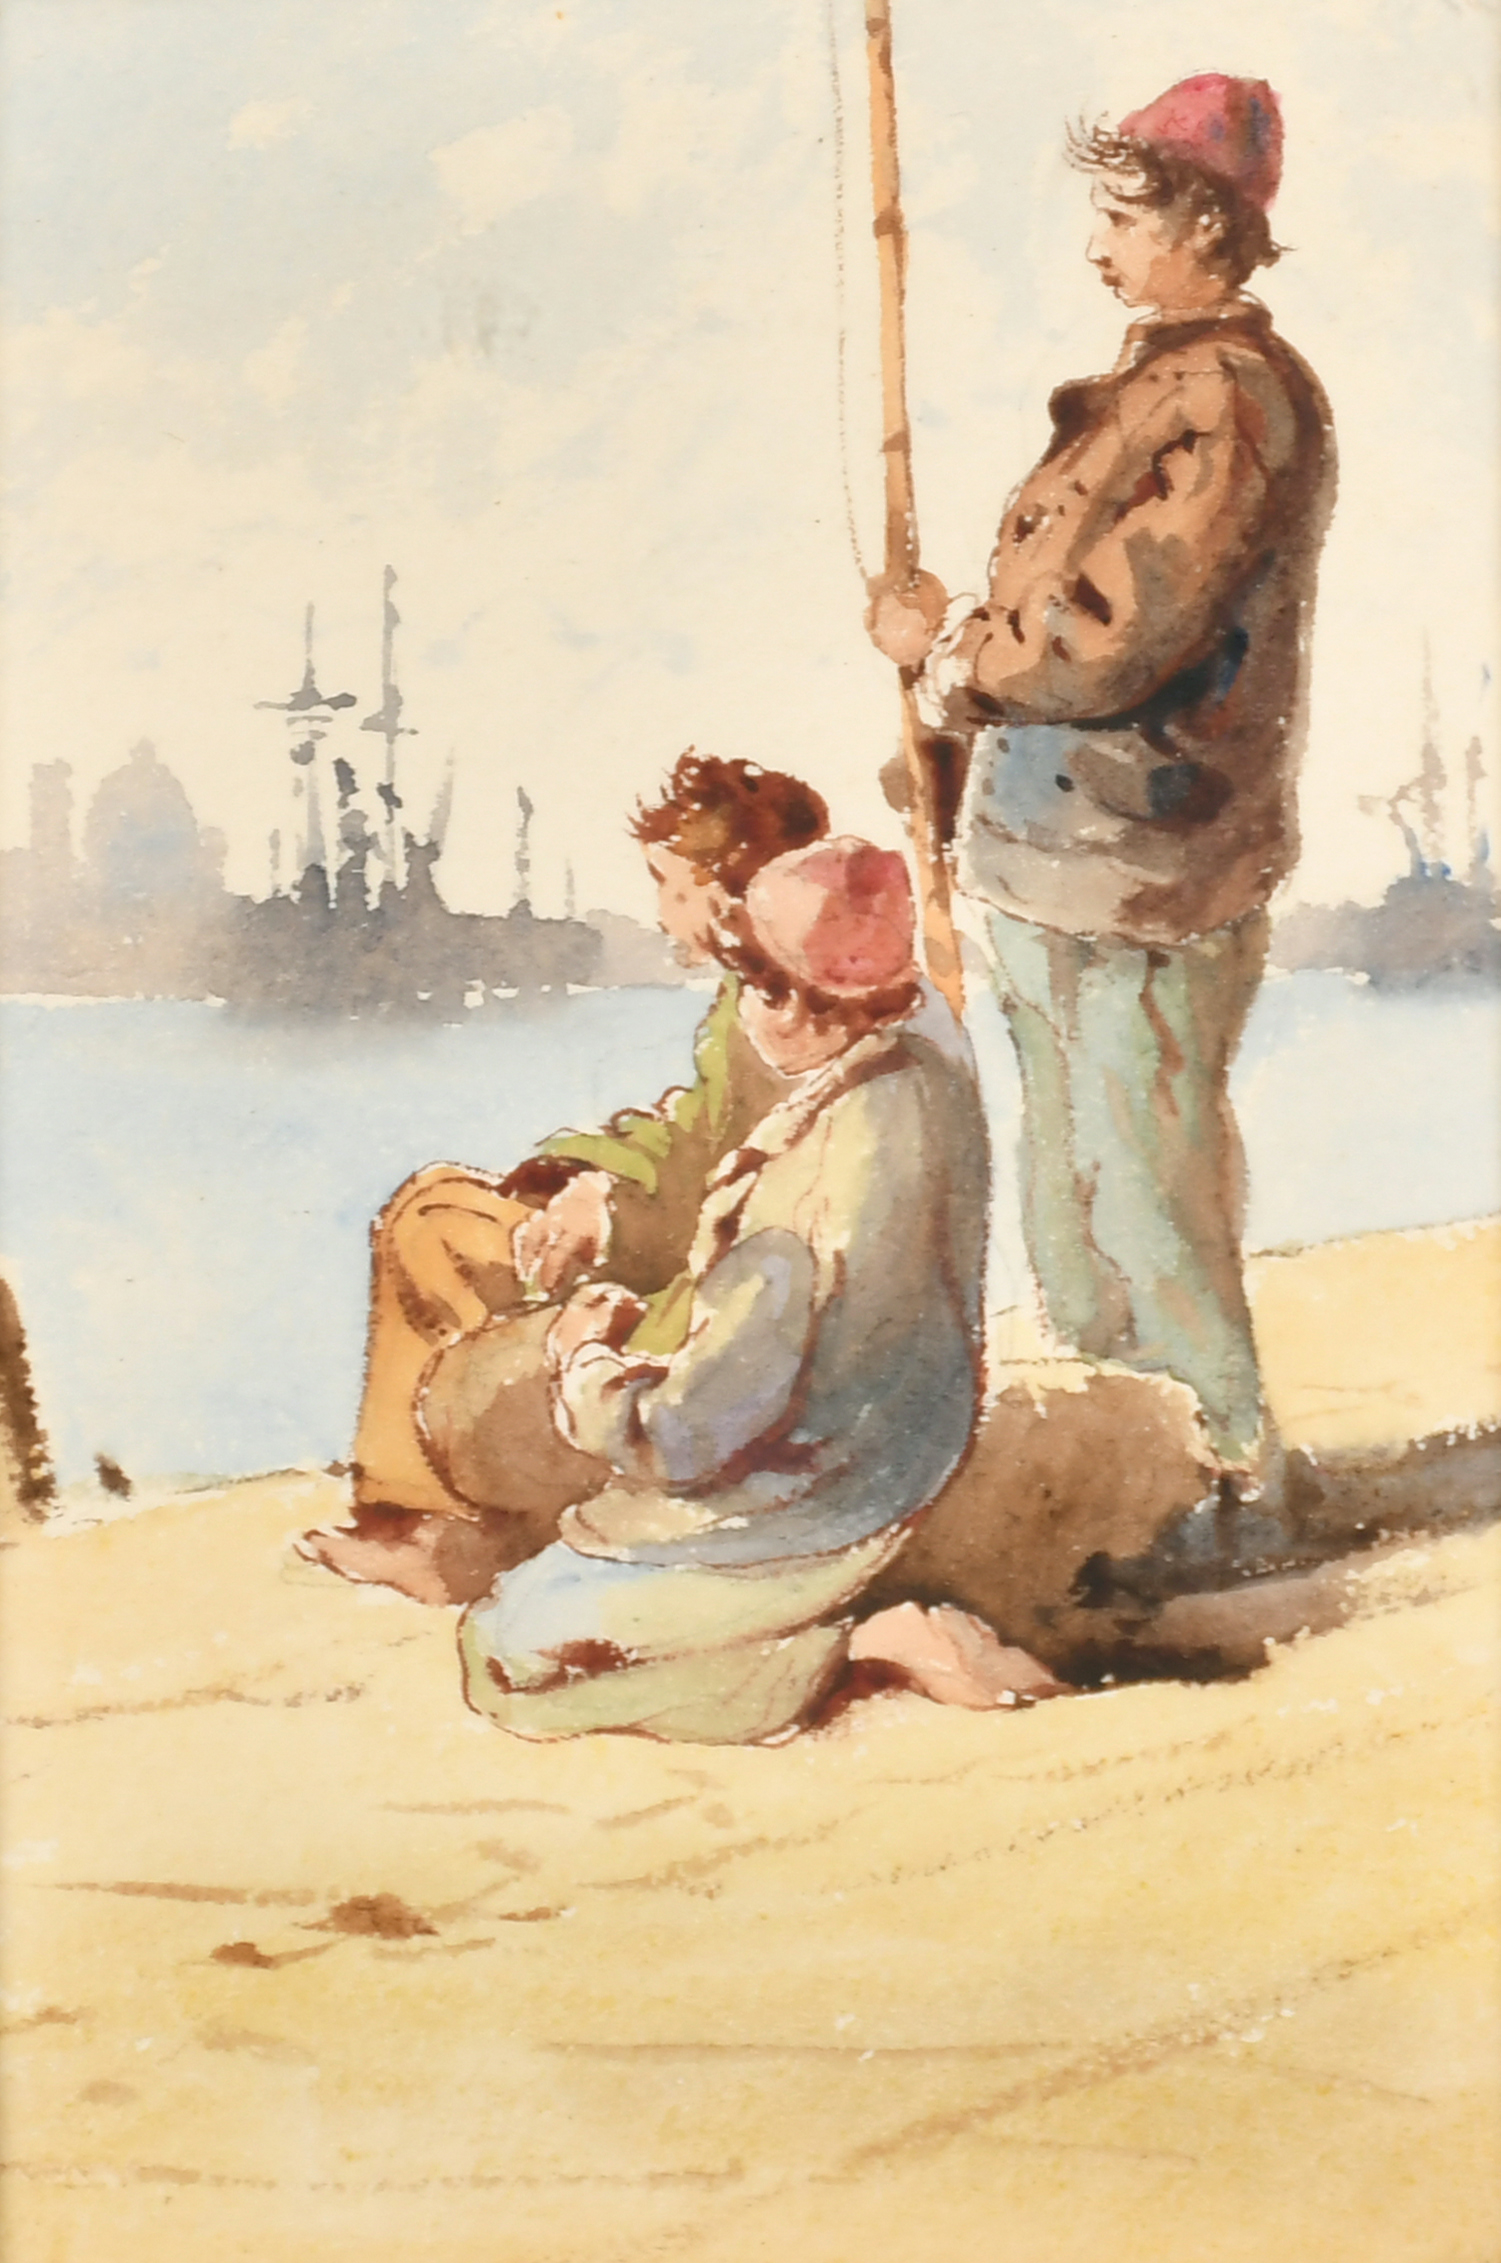 Guiseppe Carelli (1858-1921) Italian. "Venice", Watercolour, Inscribed and Dated 1878, 5.25" x 8.75" - Image 3 of 9